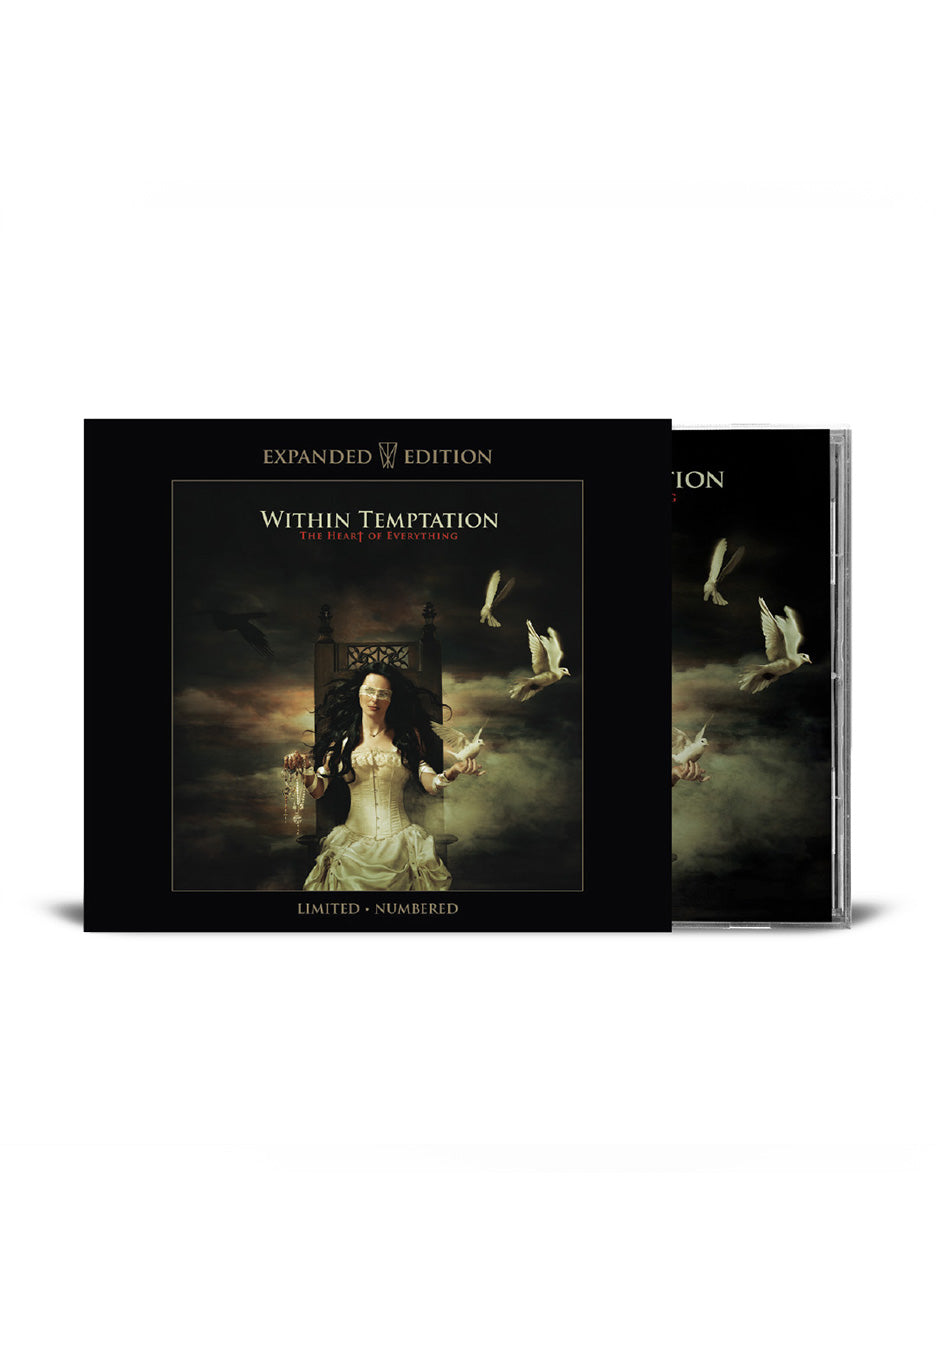 Within Temptation - Heart Of Everything 15th Anniversary Expanded Edition - 2 CD